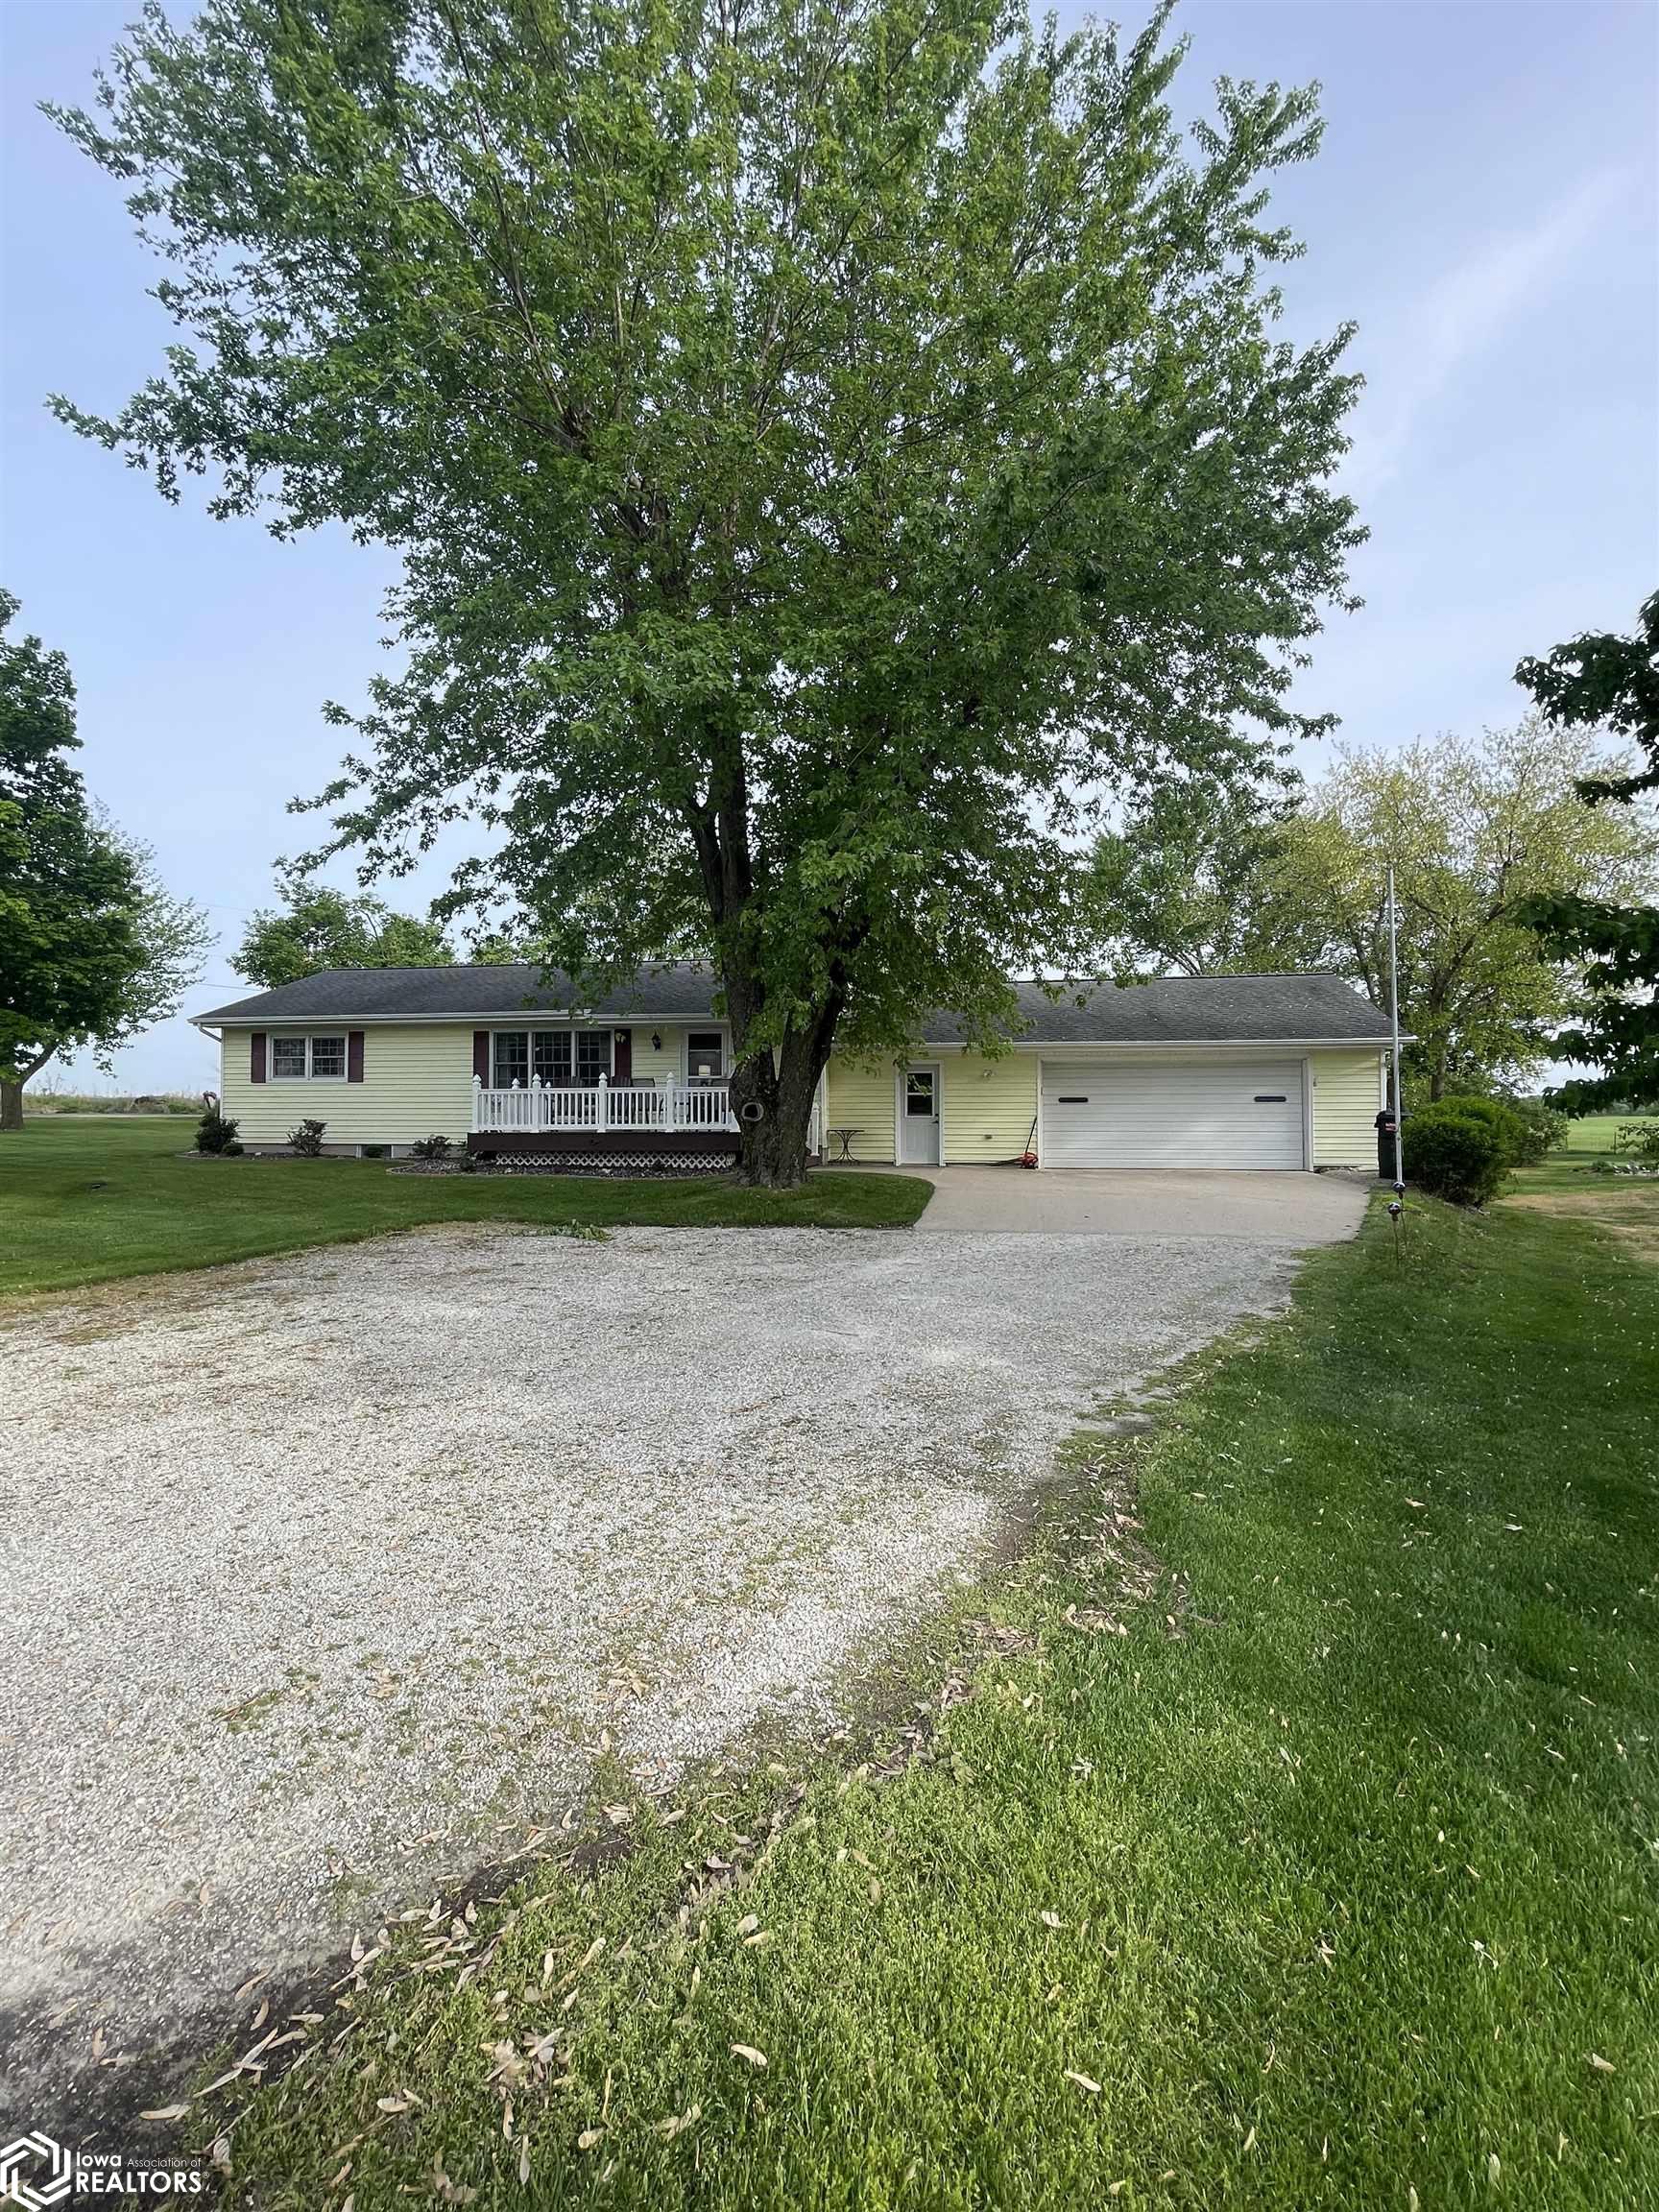 948 Rd 1245N, Gladstone, Illinois 61437, 2 Bedrooms Bedrooms, ,2 BathroomsBathrooms,Single Family,For Sale,Rd 1245N,6307710